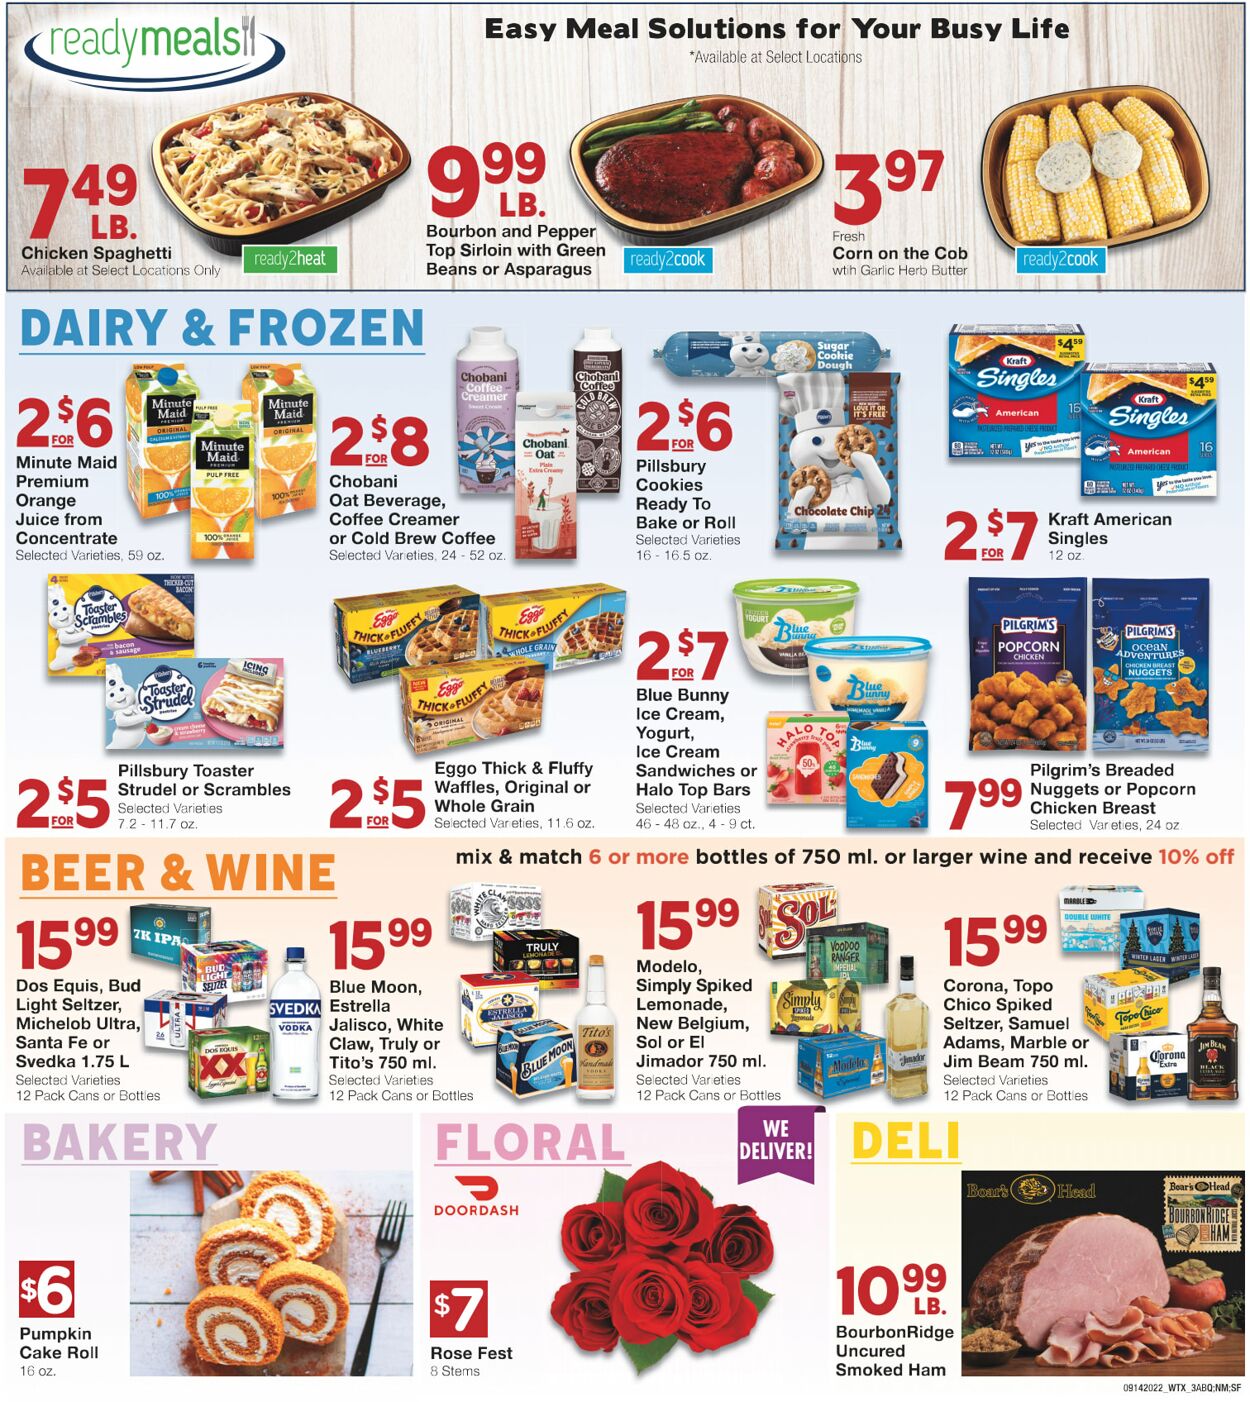 Weekly ad United Supermarkets 09/14/2022 - 09/20/2022